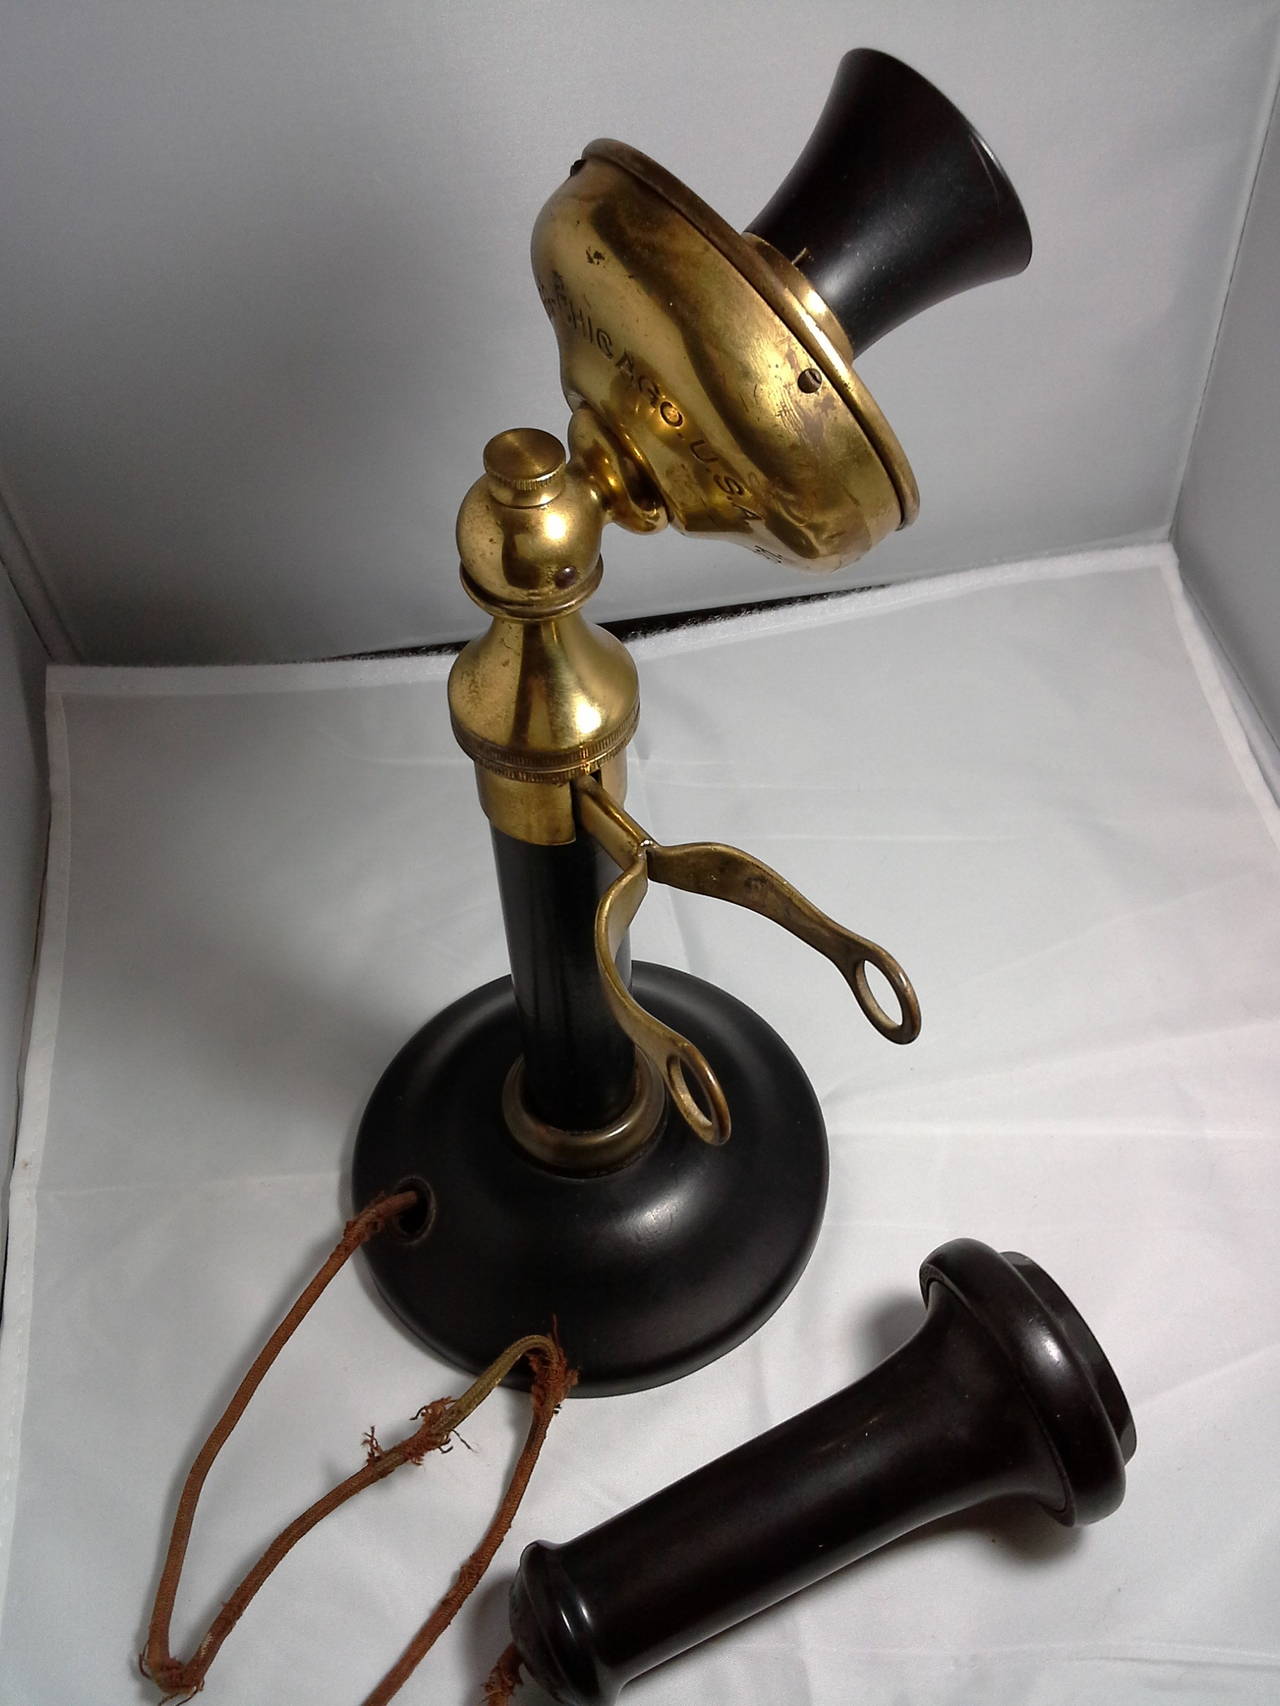 Kellogg Chicago Candlestick Brass and Bakelite, Patented 1901 4